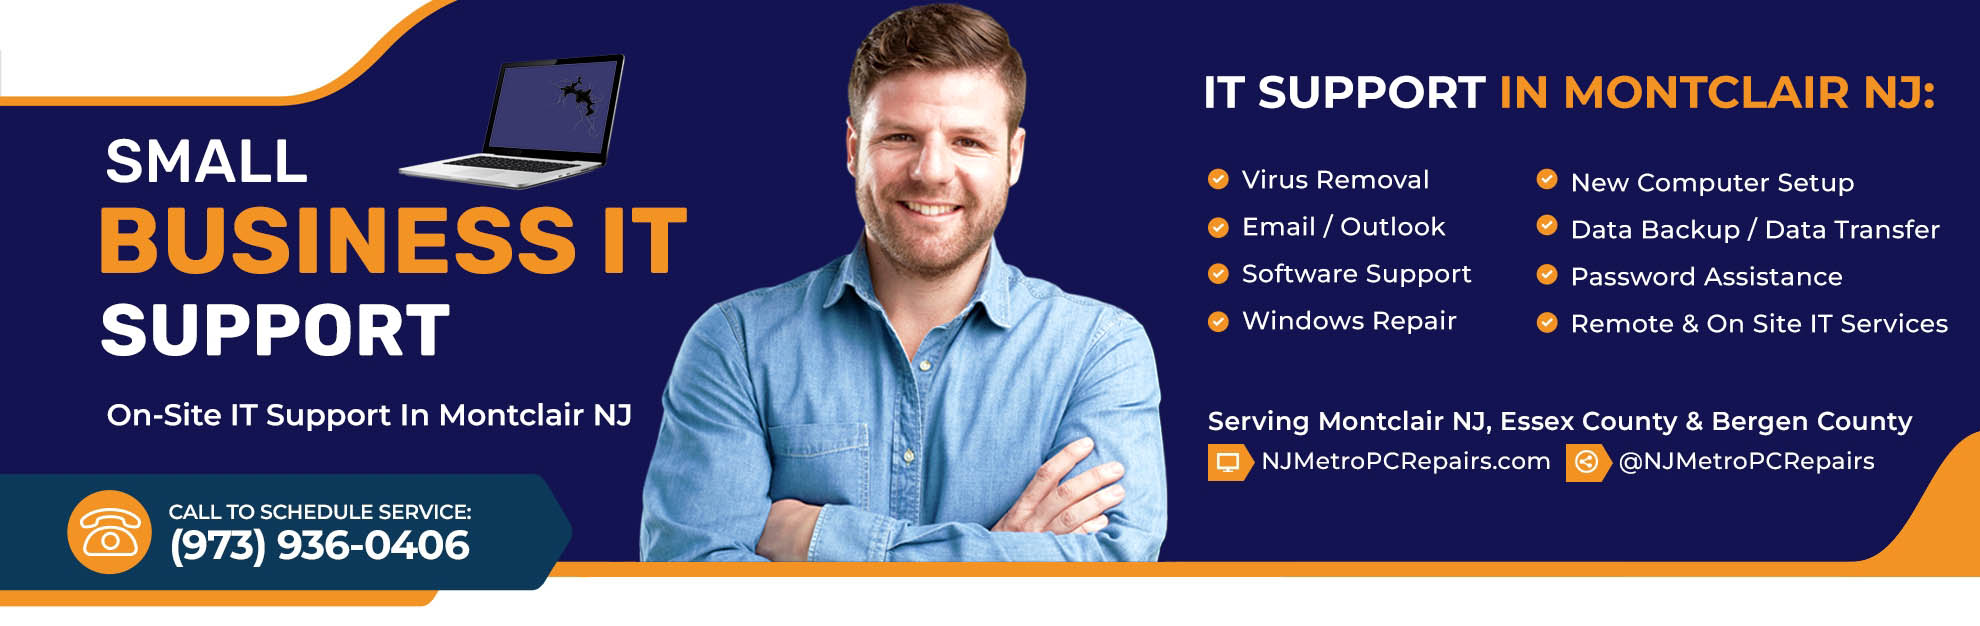 IT Support banner with confident smiling computer technician and a list of their IT services for SMBs in Montclair